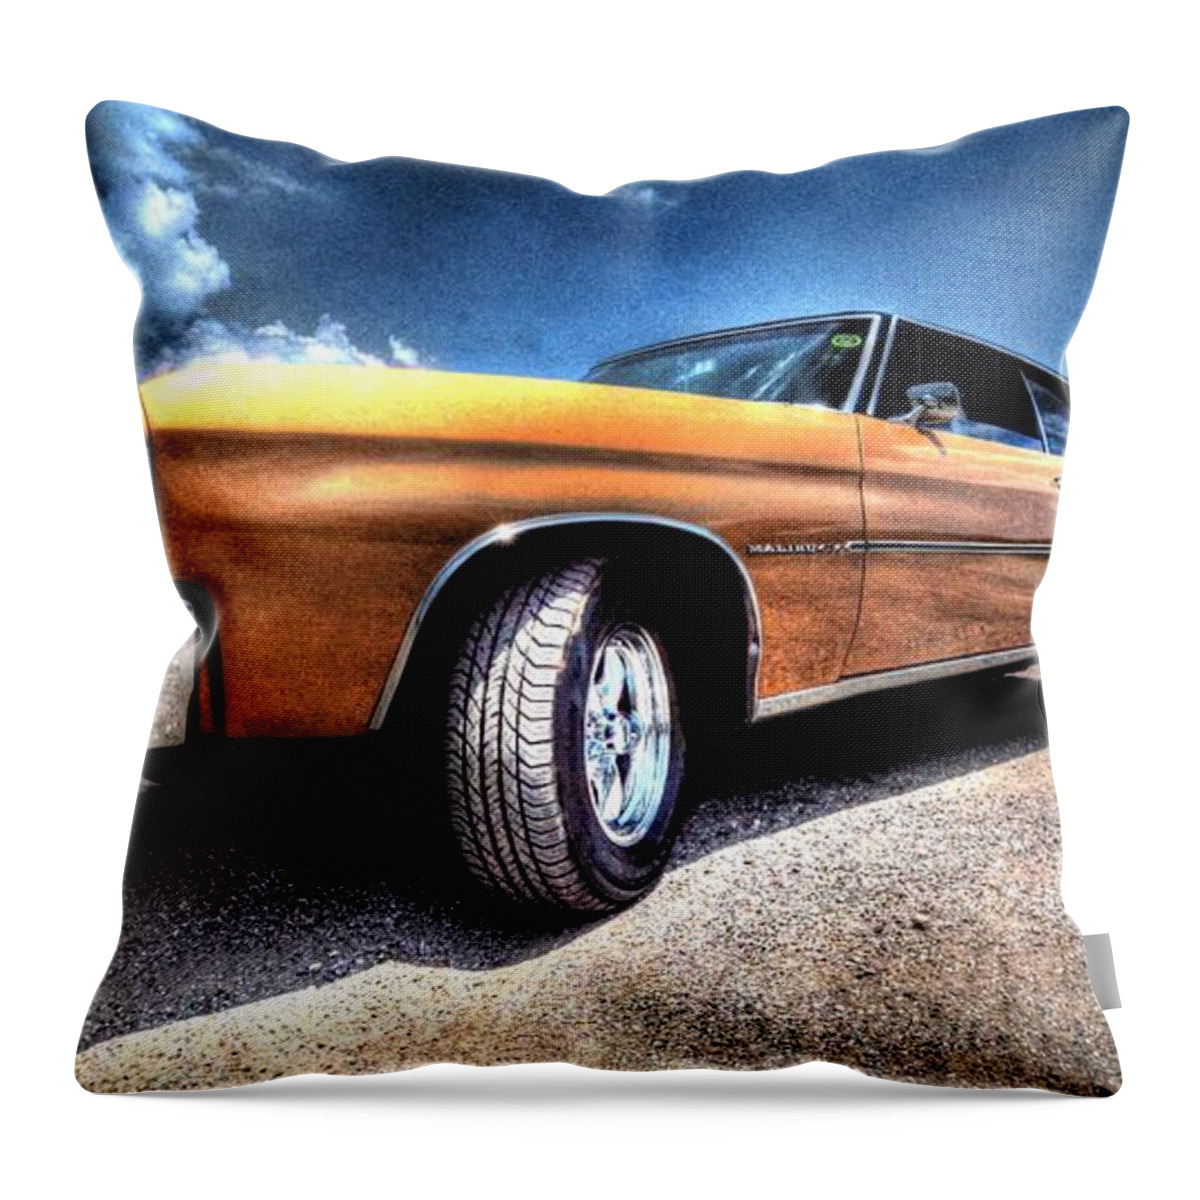 1972 Chevrolet Chevelle Throw Pillow featuring the photograph 1972 Chevelle #3 by David Morefield